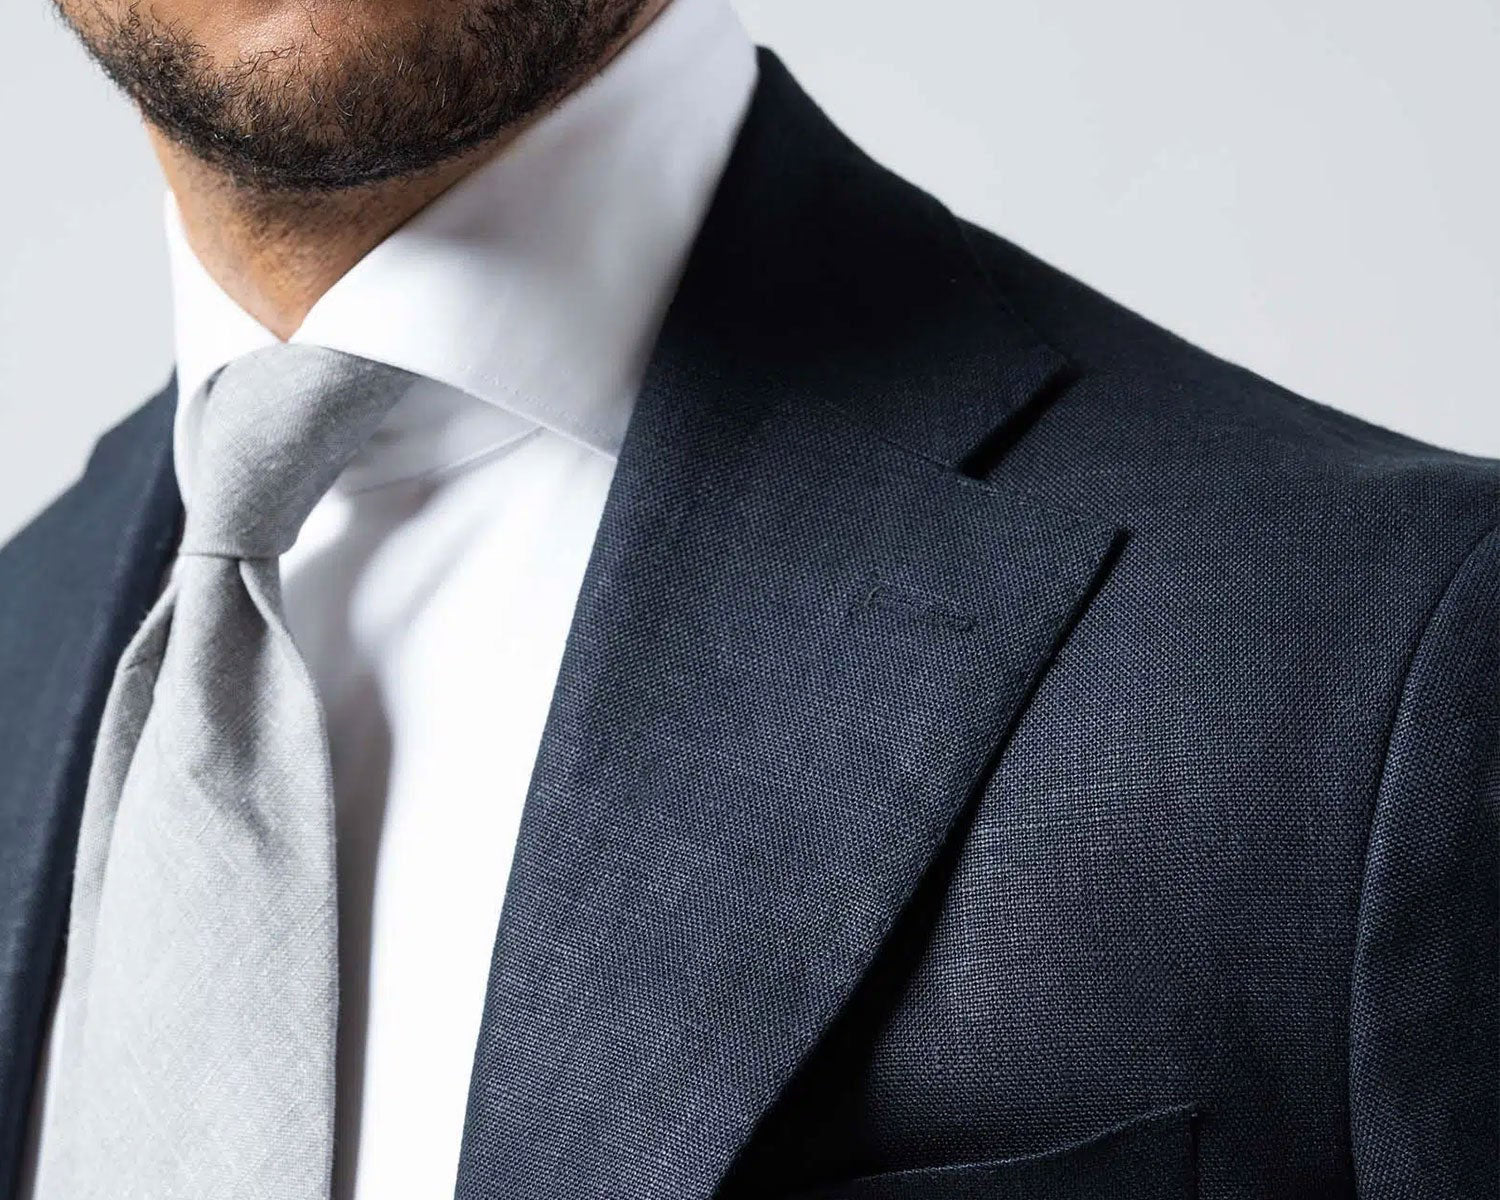 A Complete Guide to Men's Wedding Suits